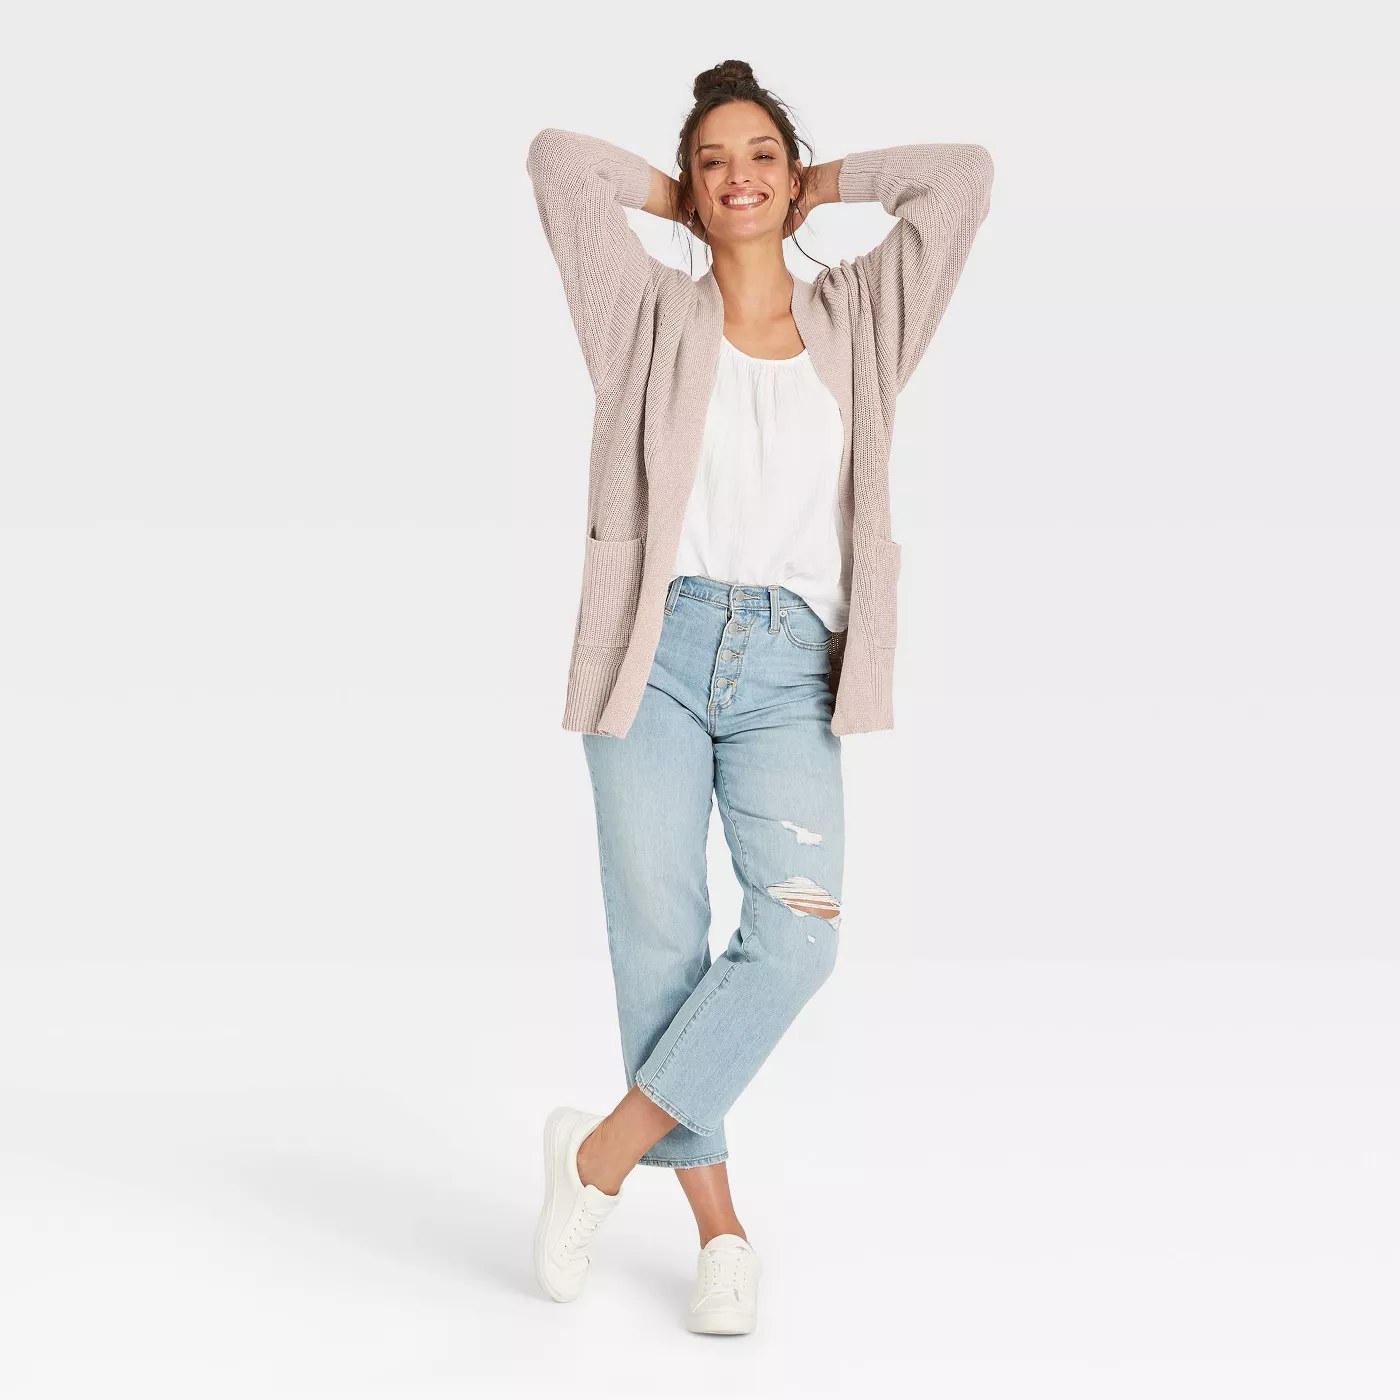 The taupe cardigan